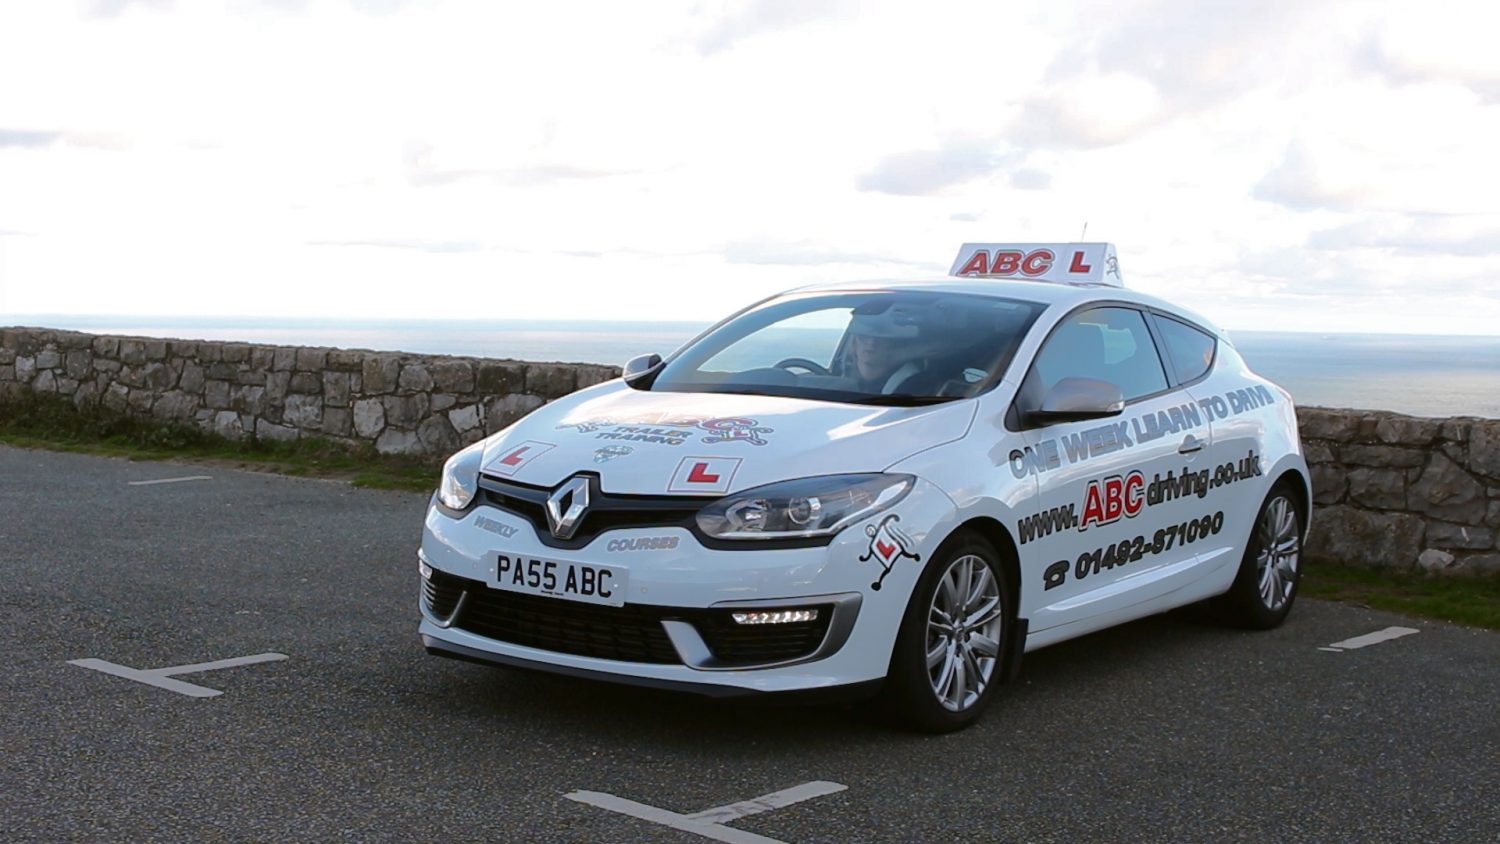 ABC Driving School North Wales